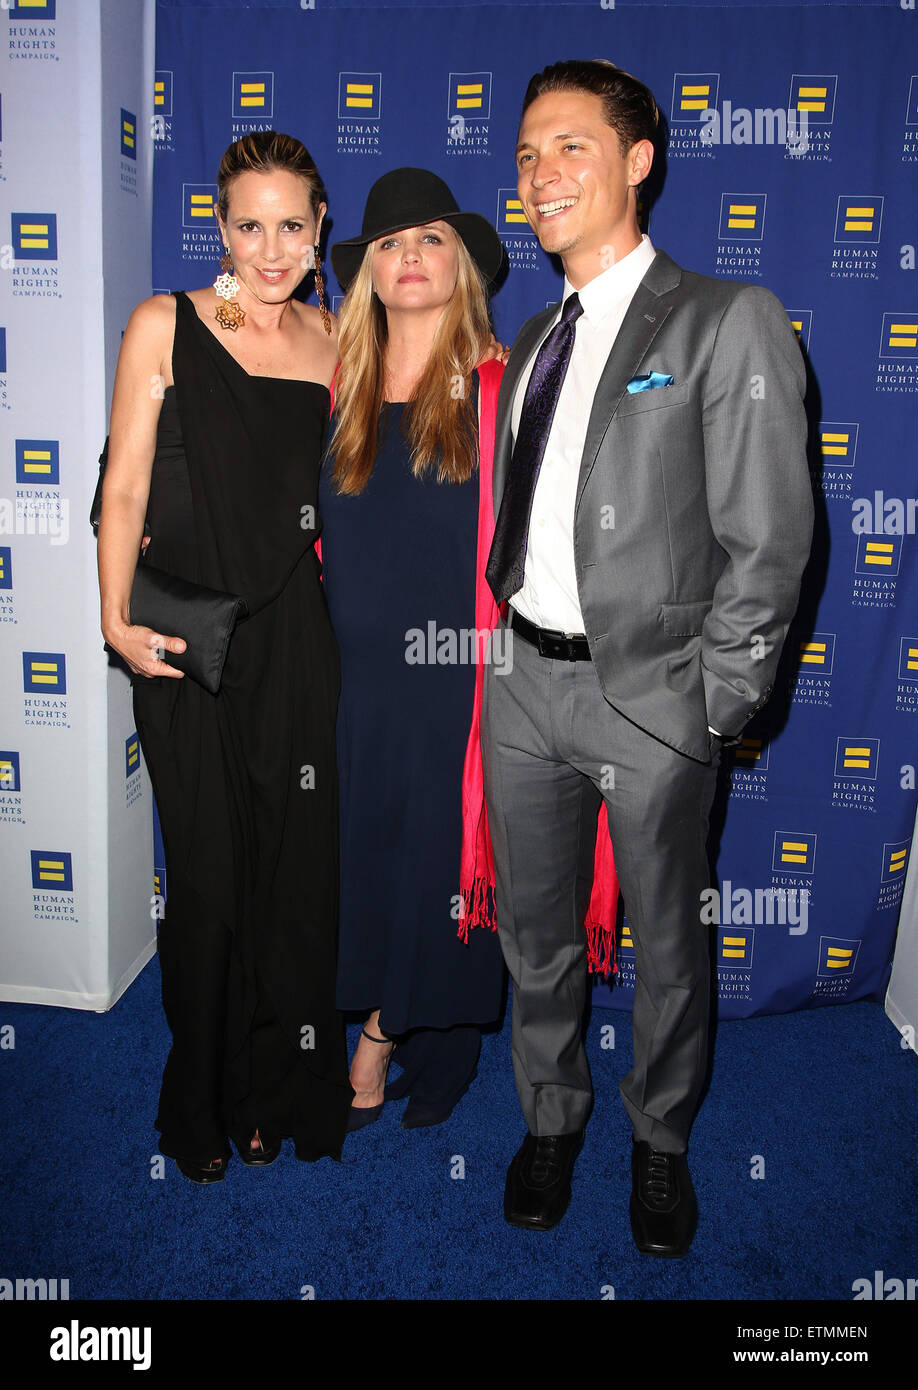 HRC Los Angeles Gala Dinner 2015 at the JW Marriott Hotel at LA Live - Arrivals  Featuring: Maria Bello, Clare Munn, Elijah Allan-Blitz Where: Los Angeles, California, United States When: 14 Mar 2015 Credit: FayesVision/WENN.com Stock Photo